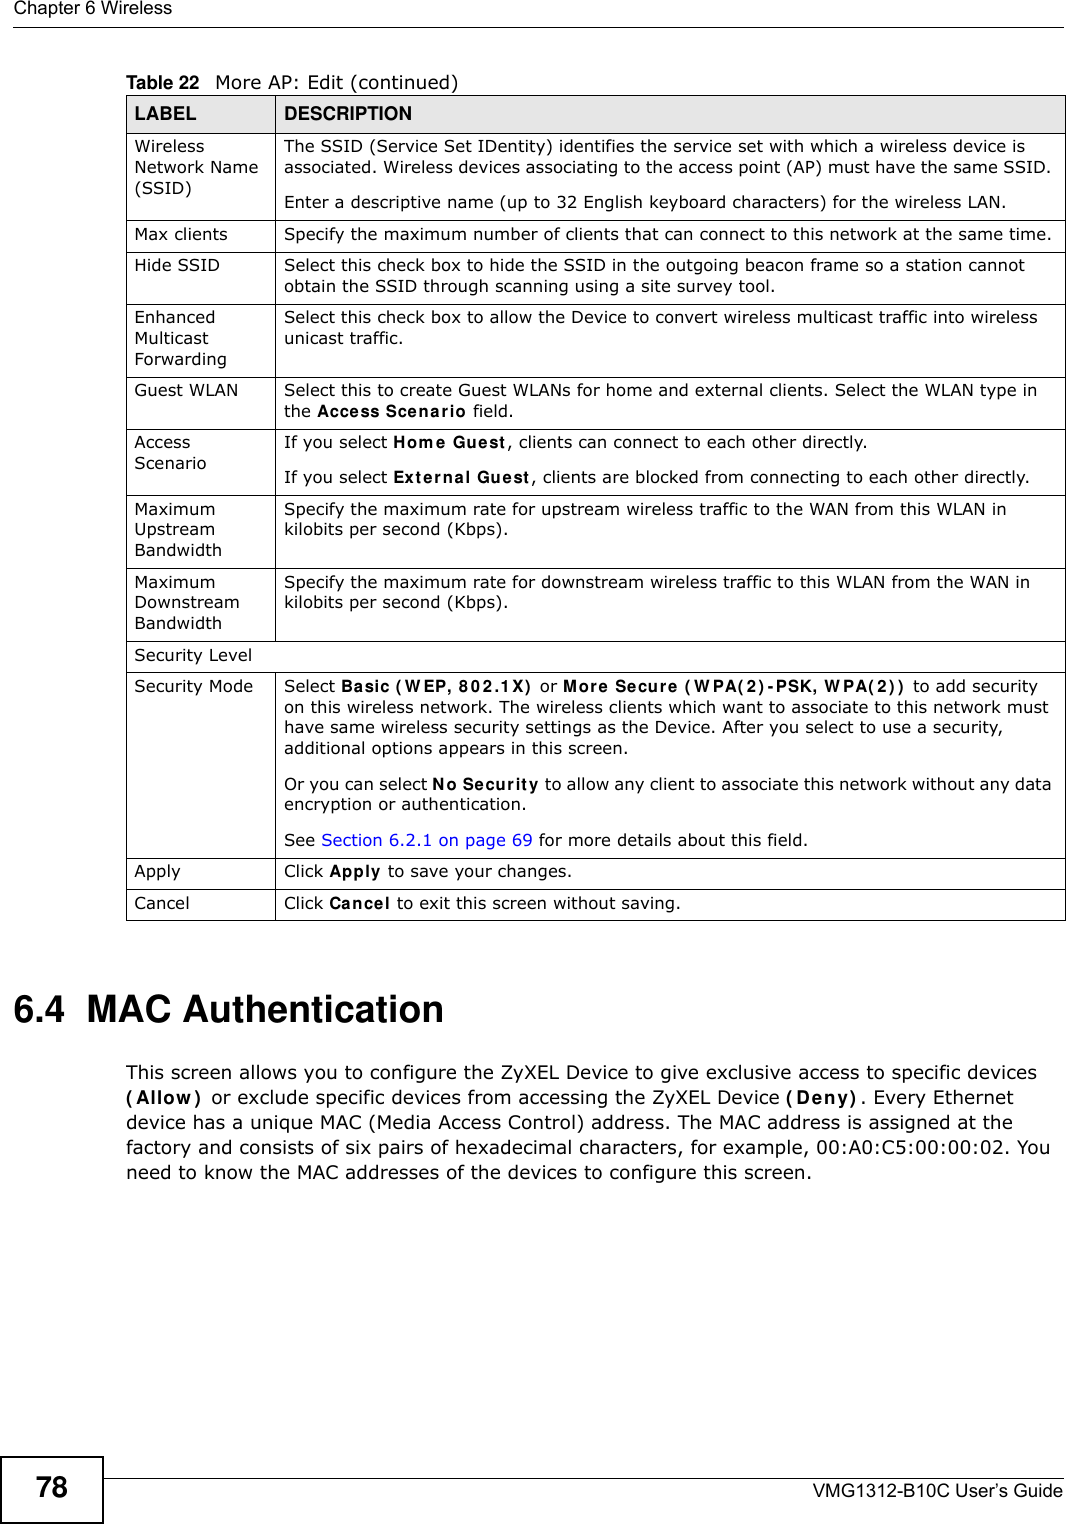 Chapter 6 WirelessVMG1312-B10C User’s Guide786.4  MAC Authentication    This screen allows you to configure the ZyXEL Device to give exclusive access to specific devices ( Allow )  or exclude specific devices from accessing the ZyXEL Device ( De ny) . Every Ethernet device has a unique MAC (Media Access Control) address. The MAC address is assigned at the factory and consists of six pairs of hexadecimal characters, for example, 00:A0:C5:00:00:02. You need to know the MAC addresses of the devices to configure this screen.Wireless Network Name (SSID)The SSID (Service Set IDentity) identifies the service set with which a wireless device is associated. Wireless devices associating to the access point (AP) must have the same SSID. Enter a descriptive name (up to 32 English keyboard characters) for the wireless LAN. Max clients Specify the maximum number of clients that can connect to this network at the same time.Hide SSID Select this check box to hide the SSID in the outgoing beacon frame so a station cannot obtain the SSID through scanning using a site survey tool.Enhanced Multicast Forwarding Select this check box to allow the Device to convert wireless multicast traffic into wireless unicast traffic.Guest WLAN Select this to create Guest WLANs for home and external clients. Select the WLAN type in the Access Scenario field.Access ScenarioIf you select Hom e Guest , clients can connect to each other directly.If you select Ext erna l Gue st , clients are blocked from connecting to each other directly.Maximum Upstream BandwidthSpecify the maximum rate for upstream wireless traffic to the WAN from this WLAN in kilobits per second (Kbps).Maximum Downstream BandwidthSpecify the maximum rate for downstream wireless traffic to this WLAN from the WAN in kilobits per second (Kbps).Security LevelSecurity Mode Select Ba sic ( W EP, 8 0 2 .1 X)  or M ore Secur e  ( W PA( 2 ) - PSK, W PA( 2 ) )  to add security on this wireless network. The wireless clients which want to associate to this network must have same wireless security settings as the Device. After you select to use a security, additional options appears in this screen.  Or you can select No Secur it y to allow any client to associate this network without any data encryption or authentication.See Section 6.2.1 on page 69 for more details about this field.Apply Click Apply to save your changes.Cancel Click Cance l to exit this screen without saving.Table 22   More AP: Edit (continued)LABEL DESCRIPTION